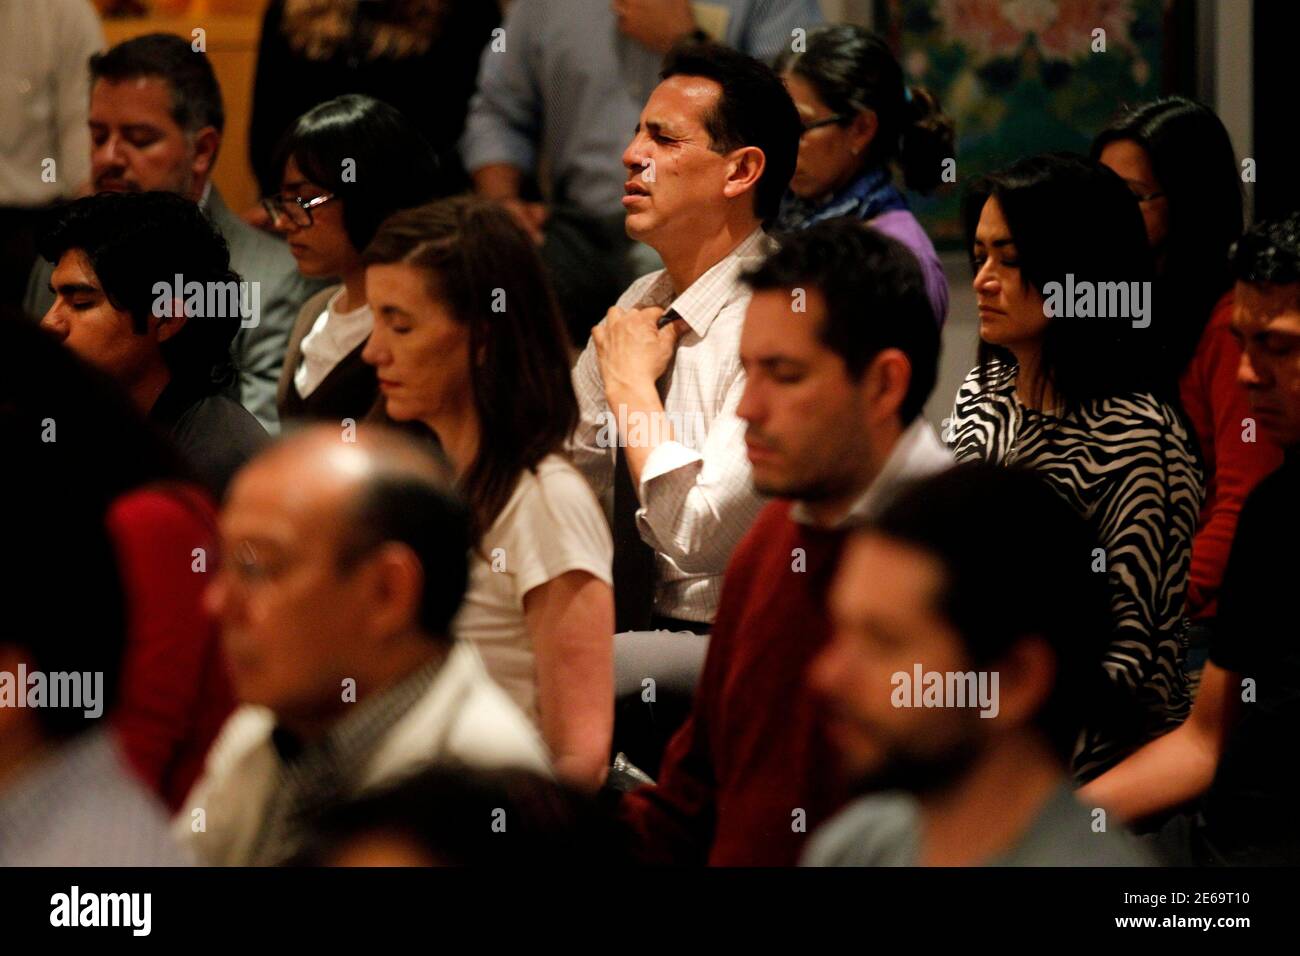 Mexican students of the Tibetan Buddhist culture meditate inside Tibet house in Mexico City, October 7, 2013. The Dalai Lama will visit Mexico from October 11 to 16. Picture taken October 7, 2013. REUTERS/Edgard Garrido (MEXICO - Tags: RELIGION ) Stock Photo